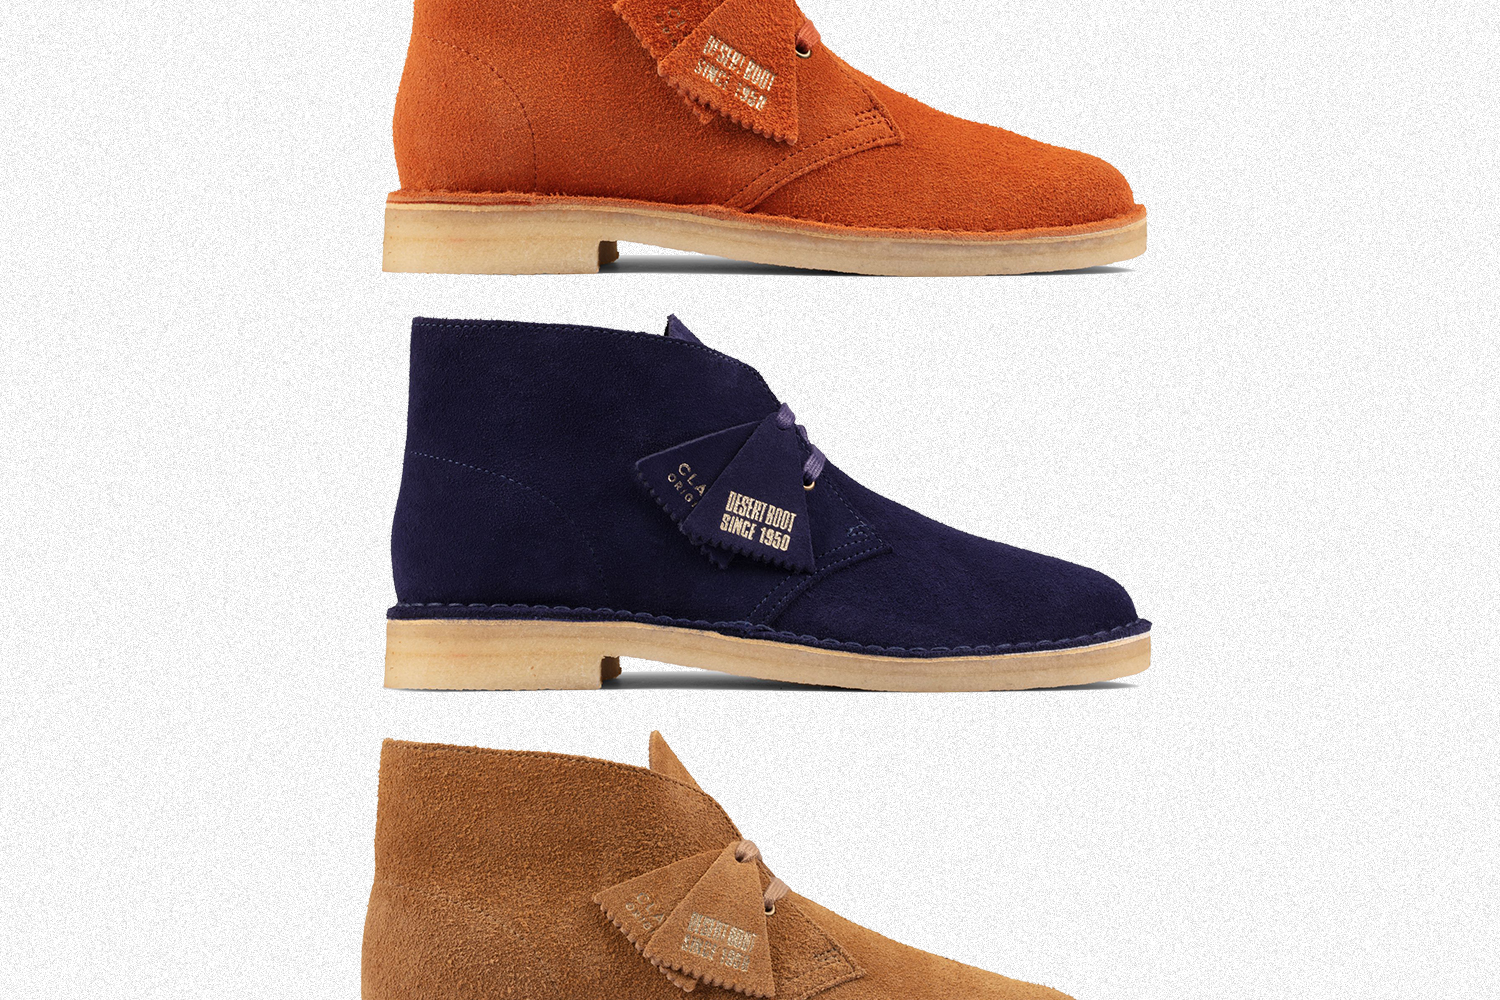 clarks boots offers